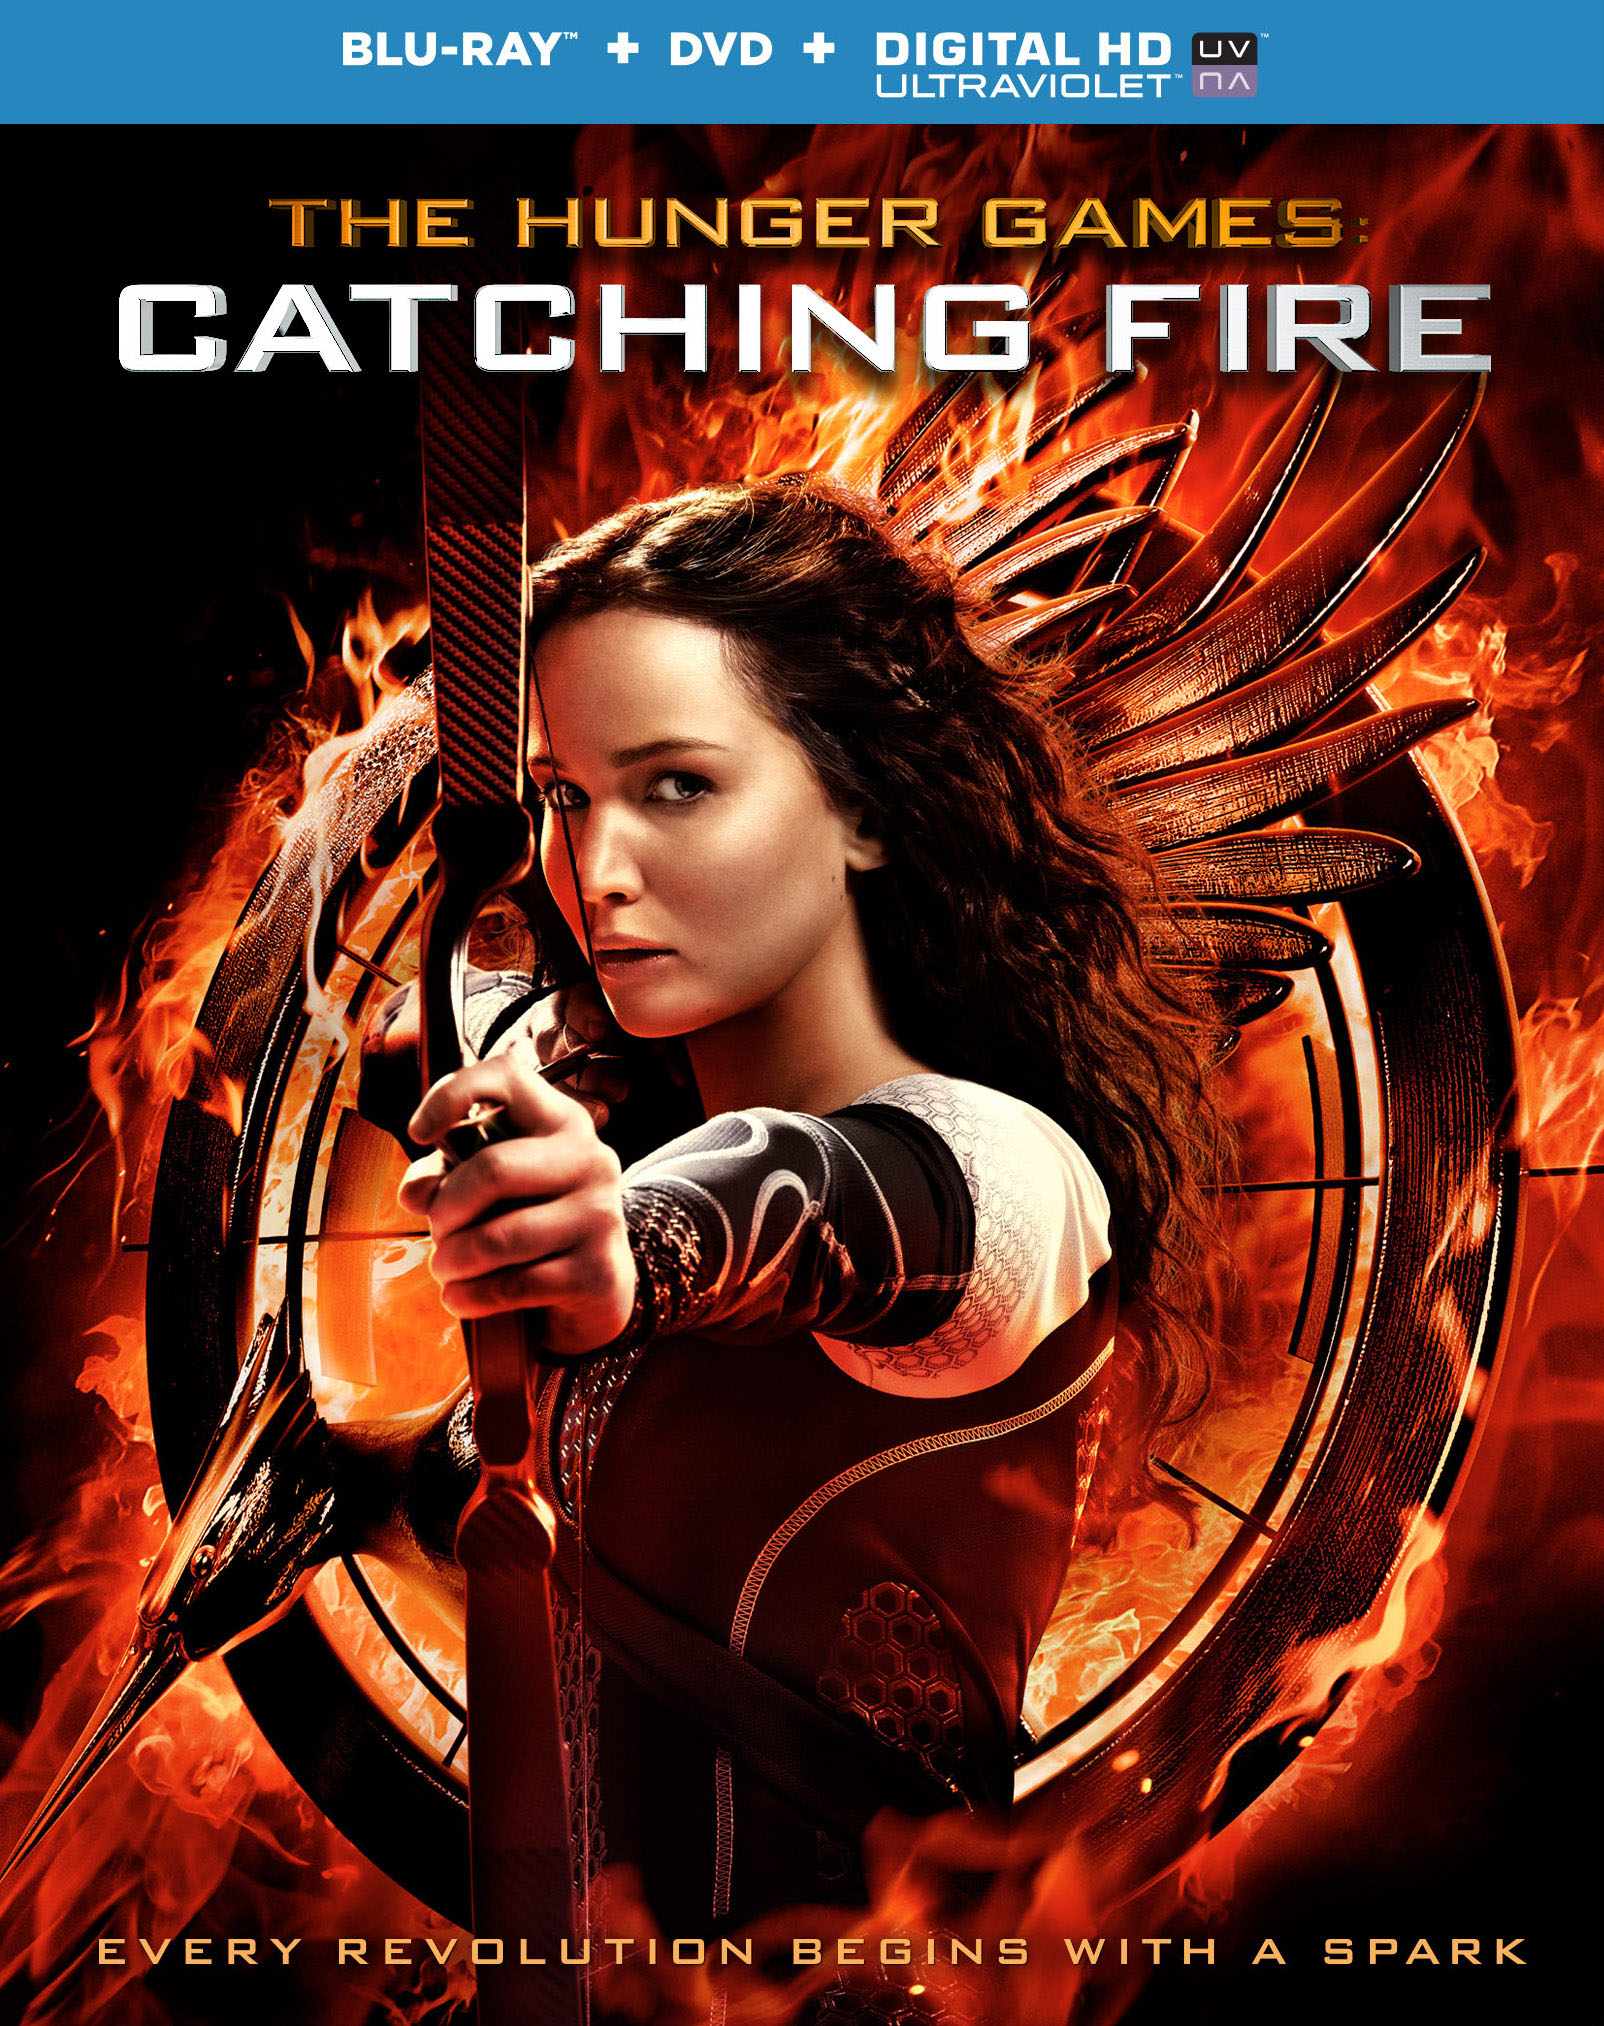 The Hunger Games: Catching Fire [Includes Digital Copy] [Blu-ray] [2013] - 